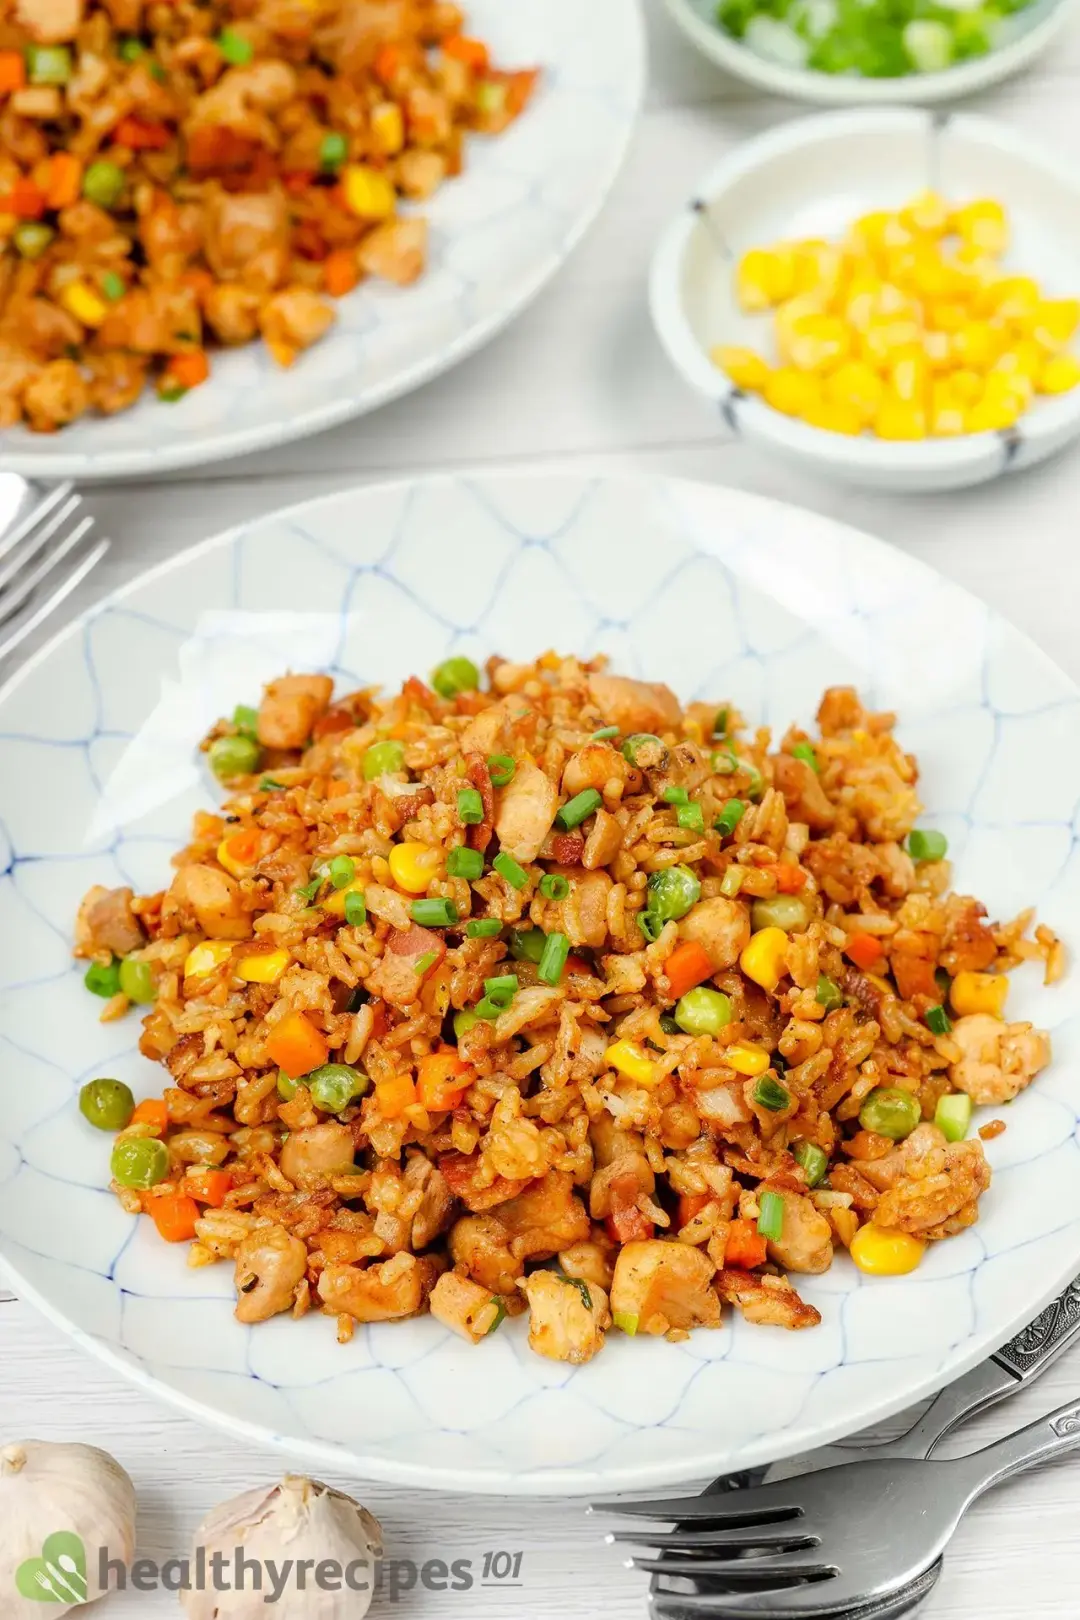 What to Serve With Chicken Fried Rice